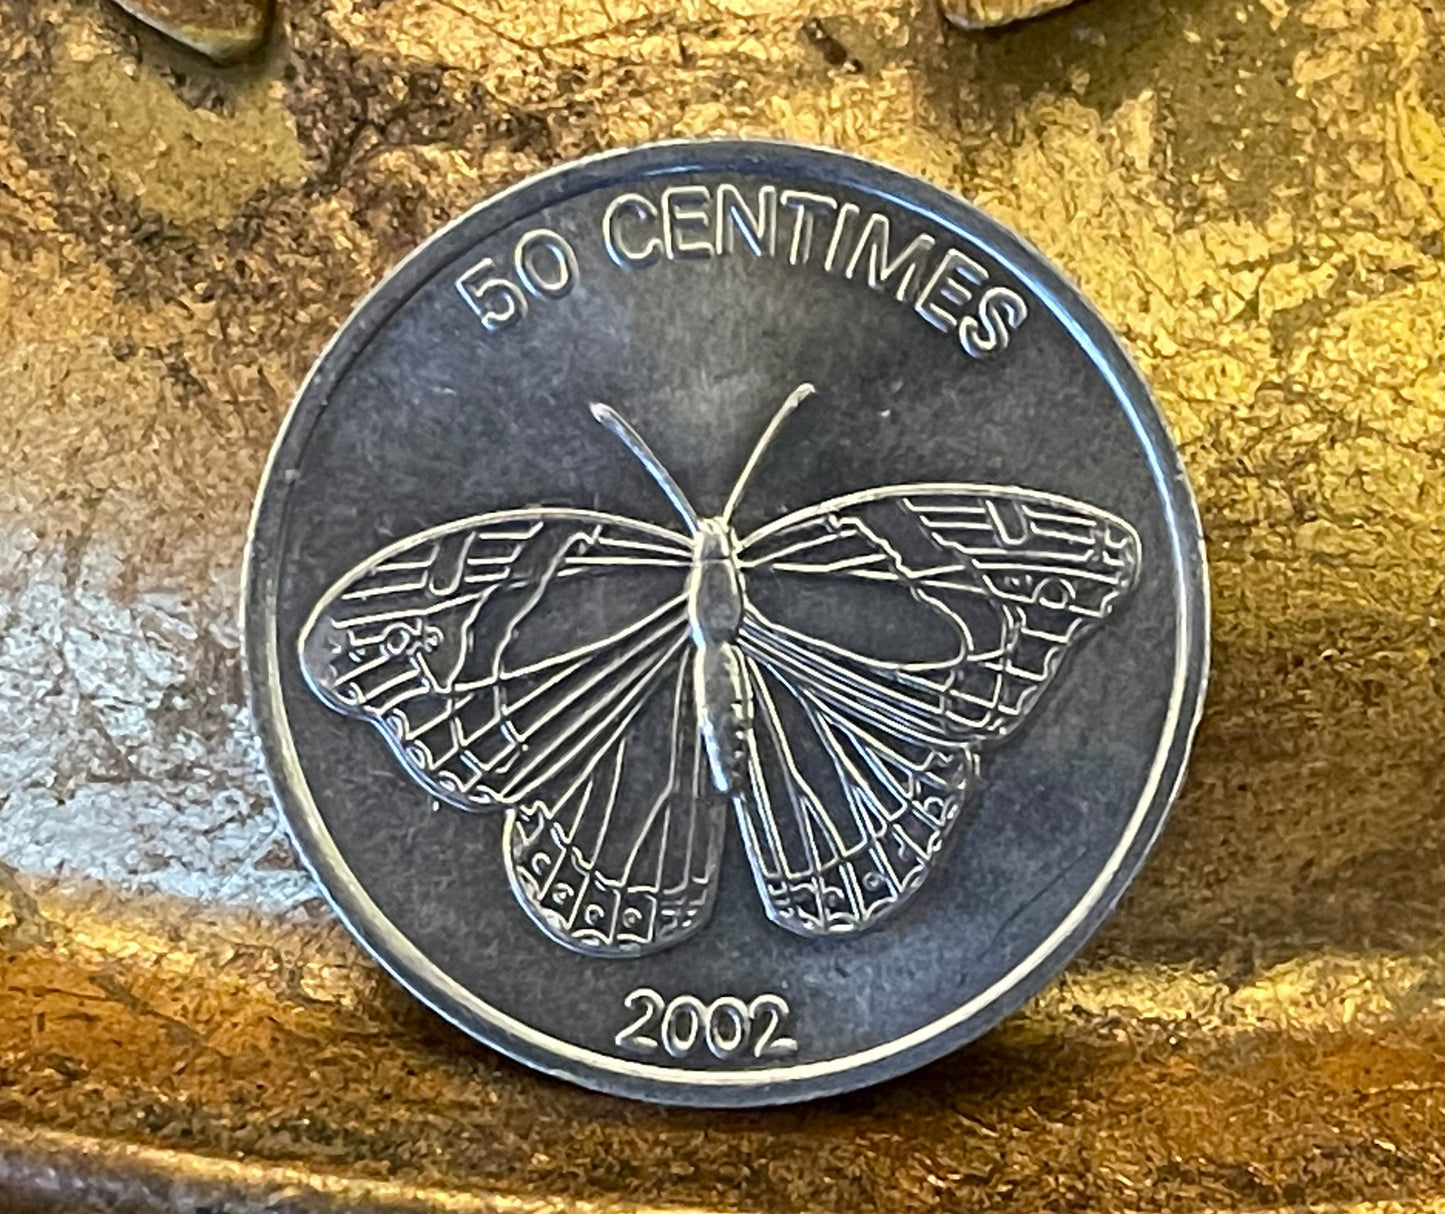 Butterfly & Lion 50 Centimes Democratic Republic of Congo Authentic Coin Money for Jewelry and Craft Making